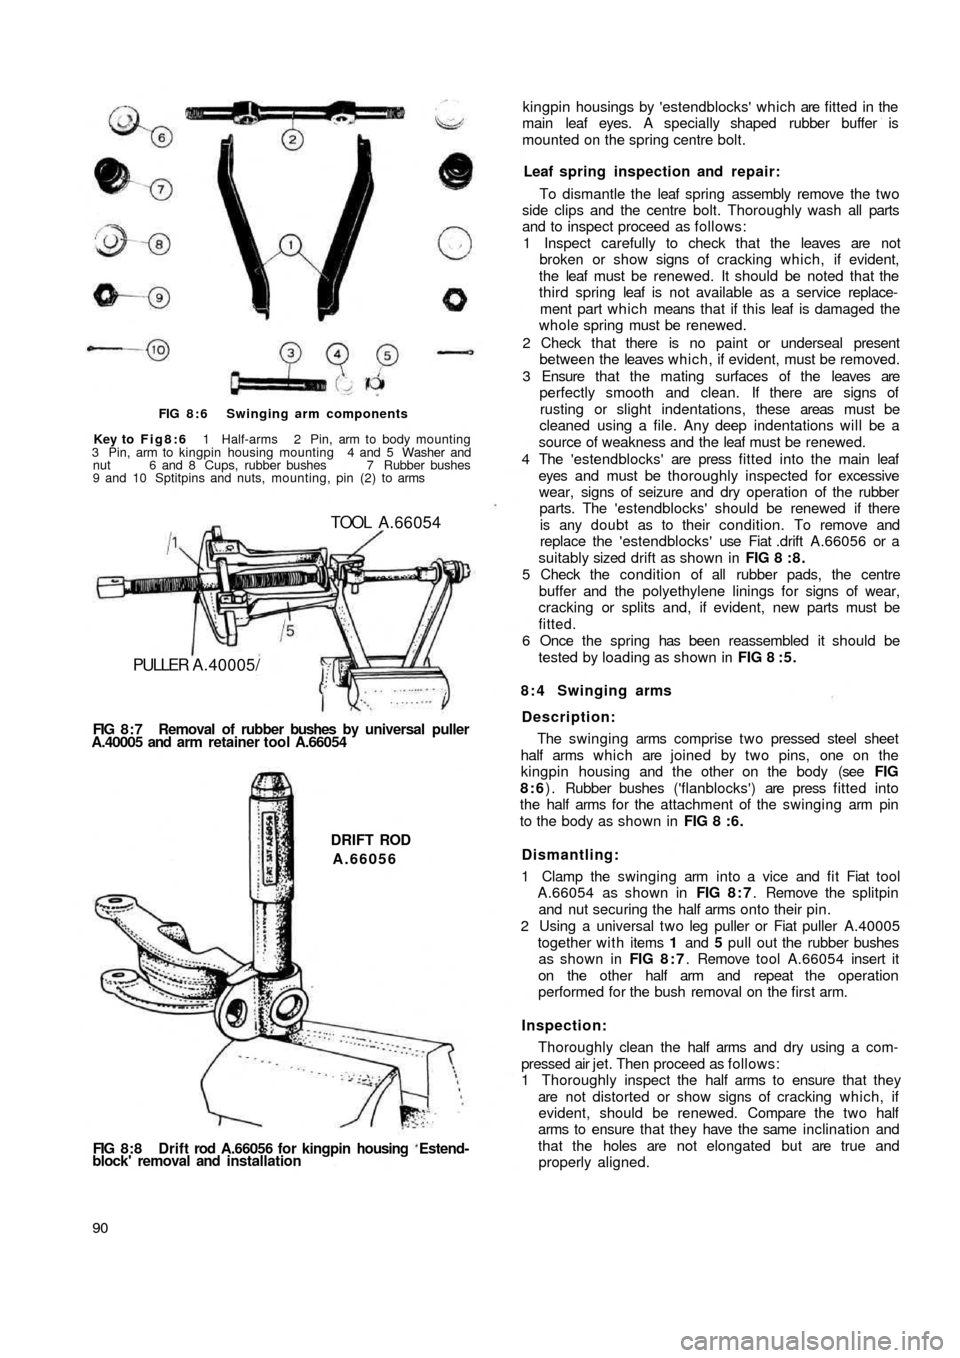 FIAT 500 1957 1.G Manual Online FIG 8:6  Swinging arm components
Key to  Fig8:6  1  Half-arms  2  Pin, arm to body mounting
3 Pin, arm to kingpin housing mounting 4 and 5 Washer and
nut 6 and 8 Cups, rubber bushes 7 Rubber bushes
9 